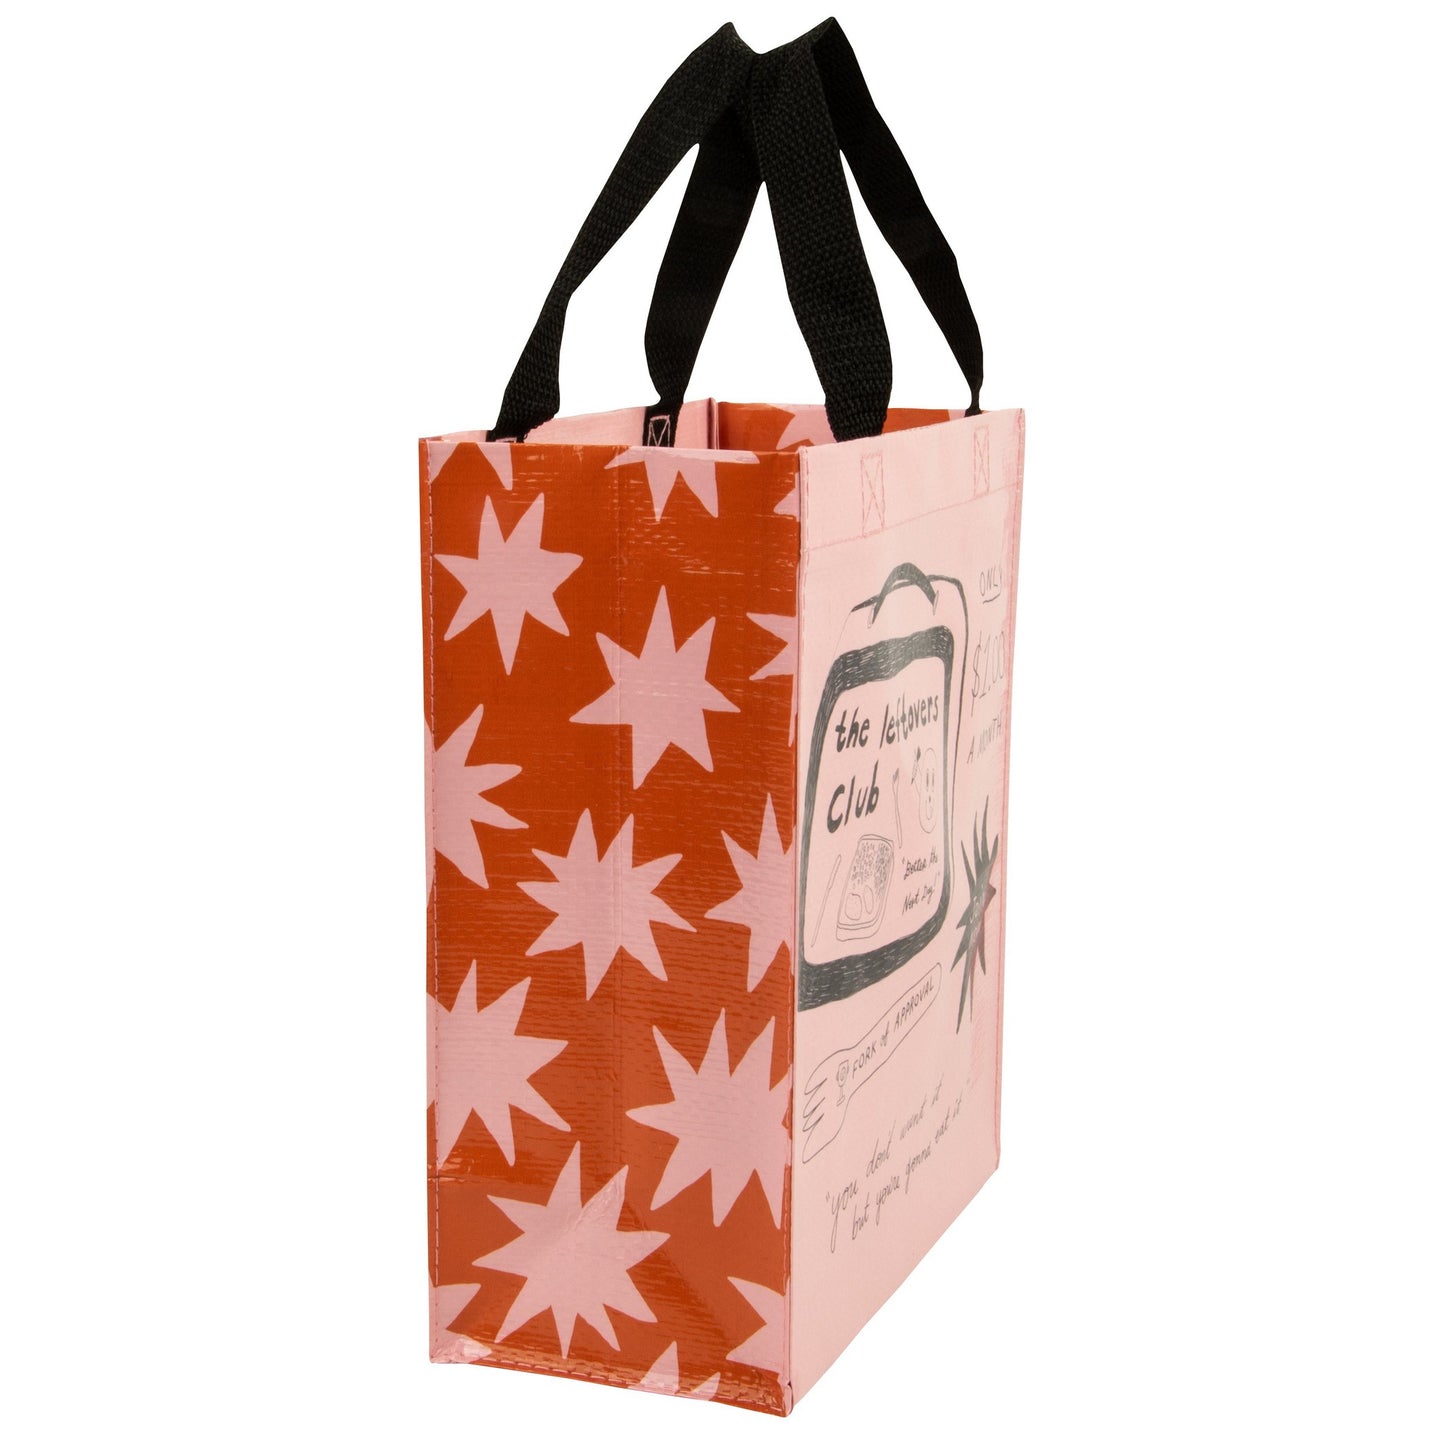 The Leftovers Club Handy Tote Bag | Reusable Lunch Gift Bag | 10" x 8.5"